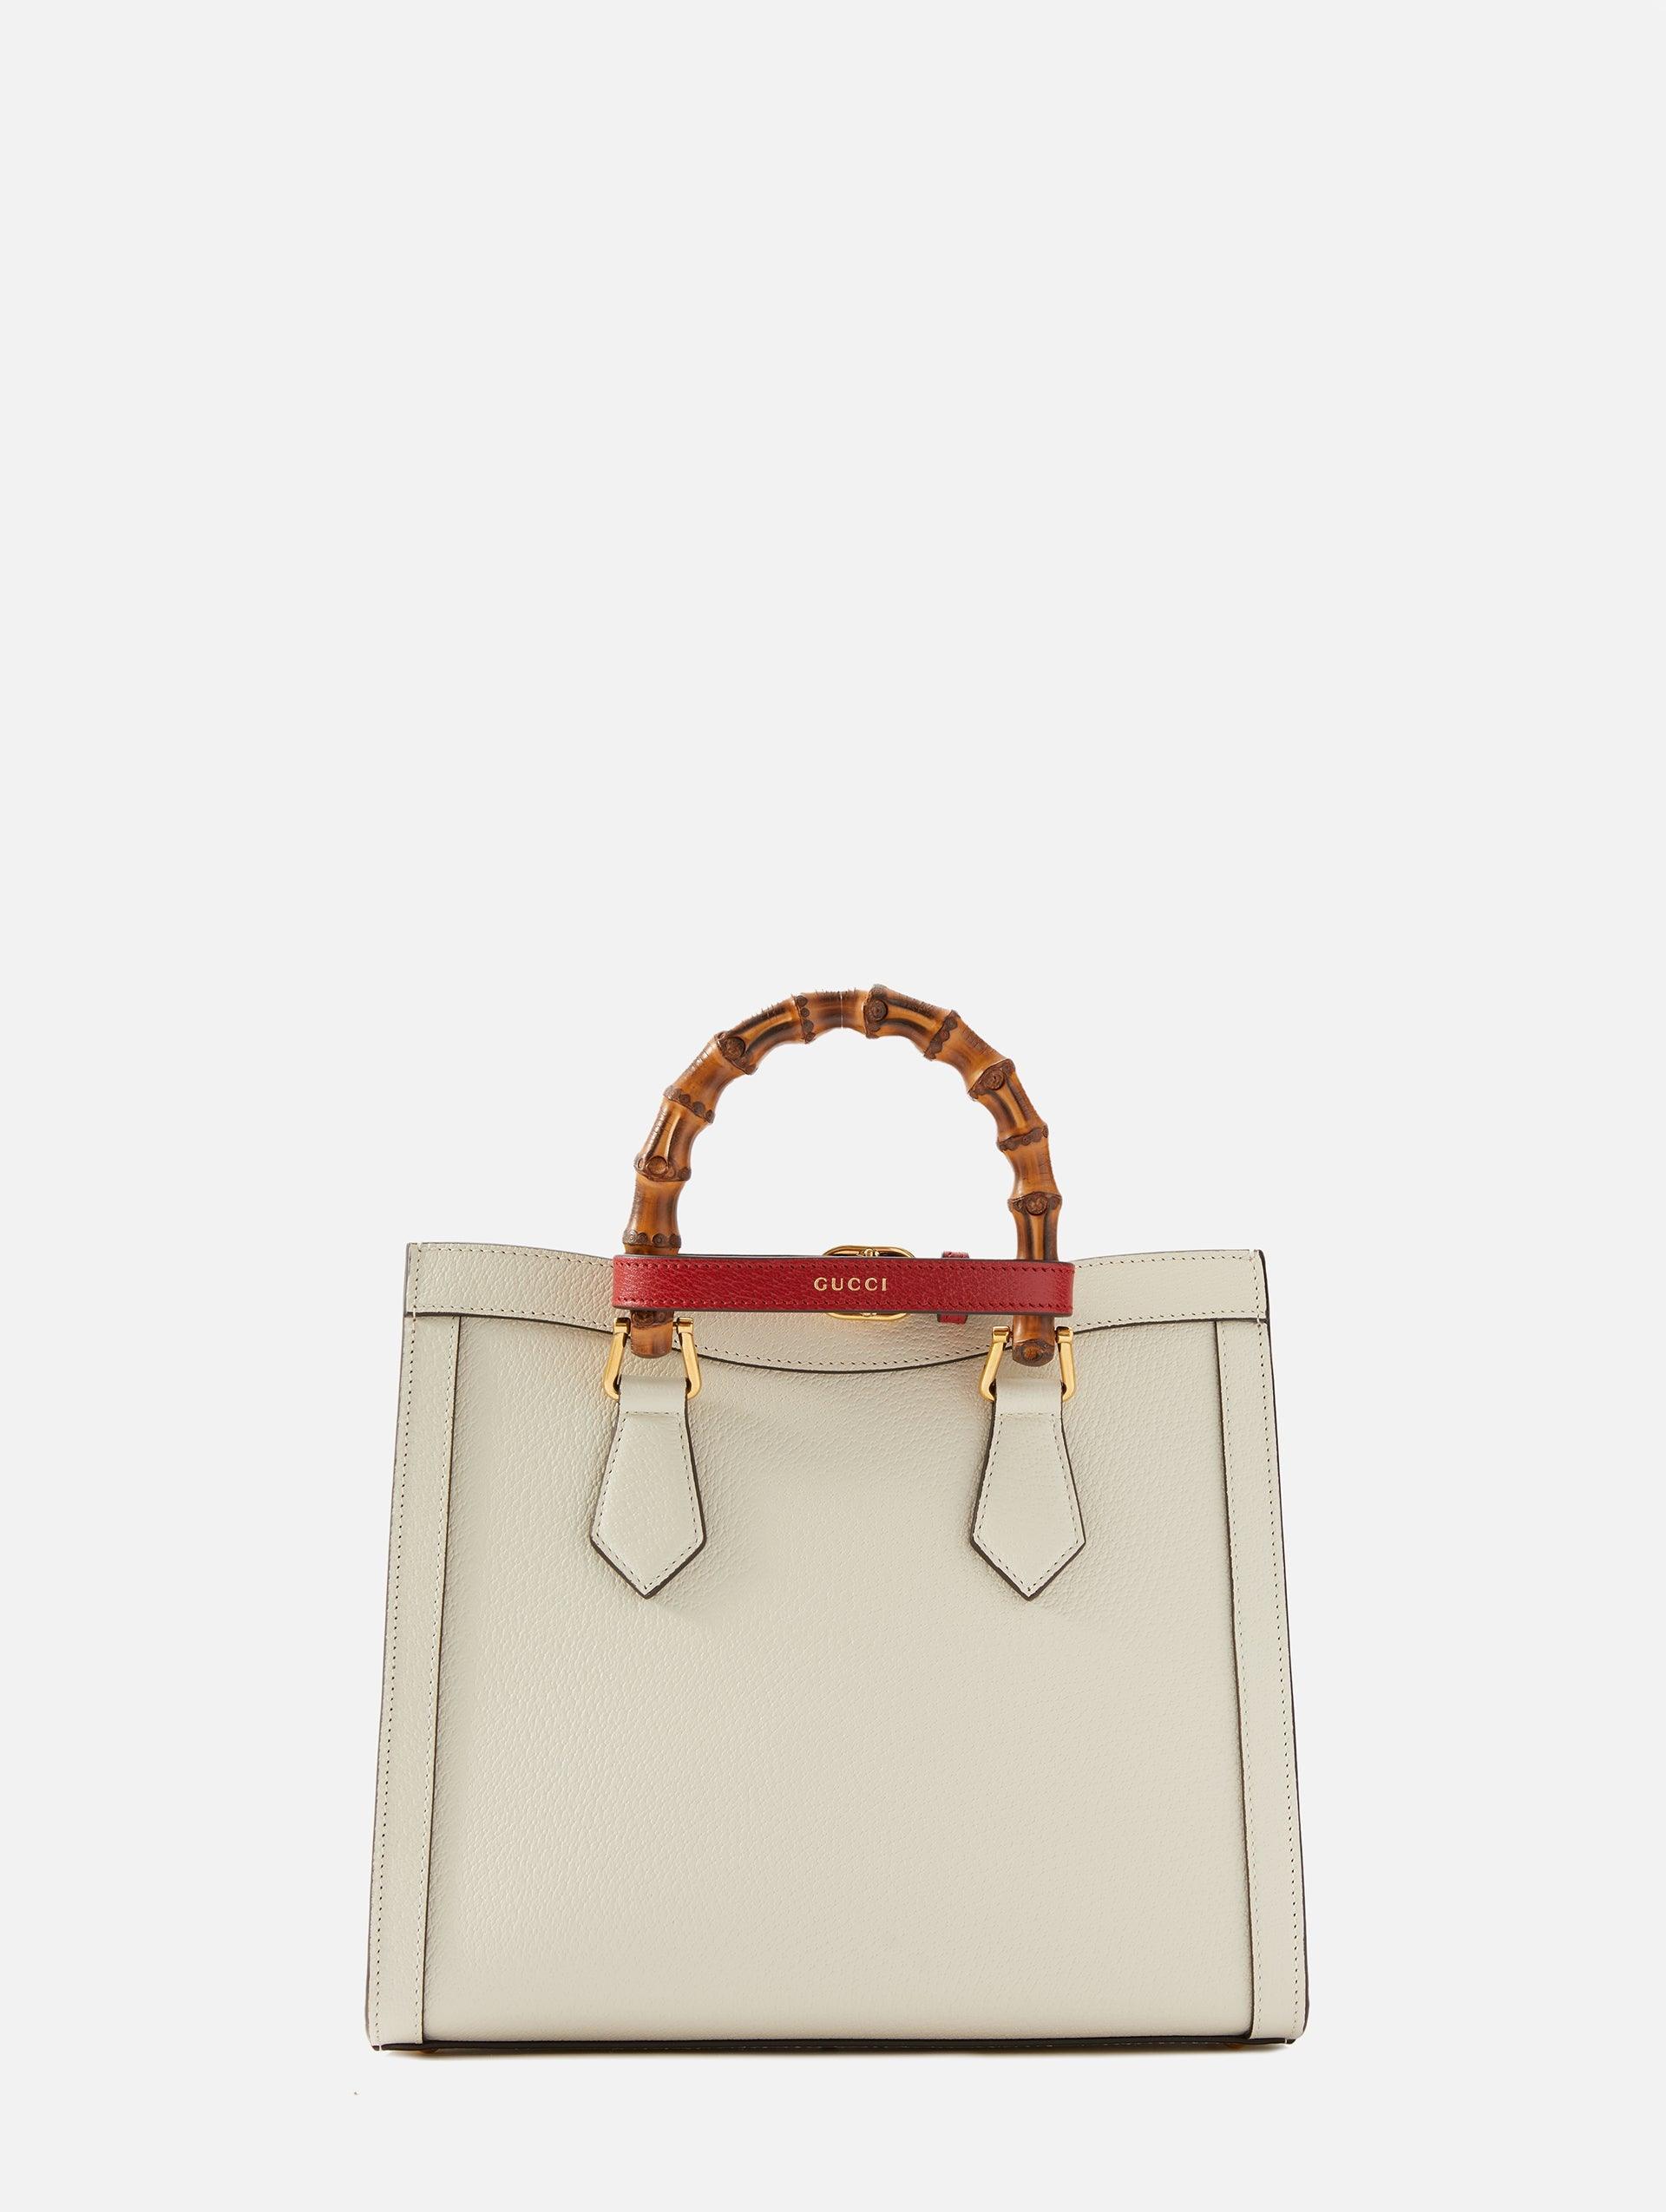 GUCCI Diana Small Tote Bag - The Iconic Issue